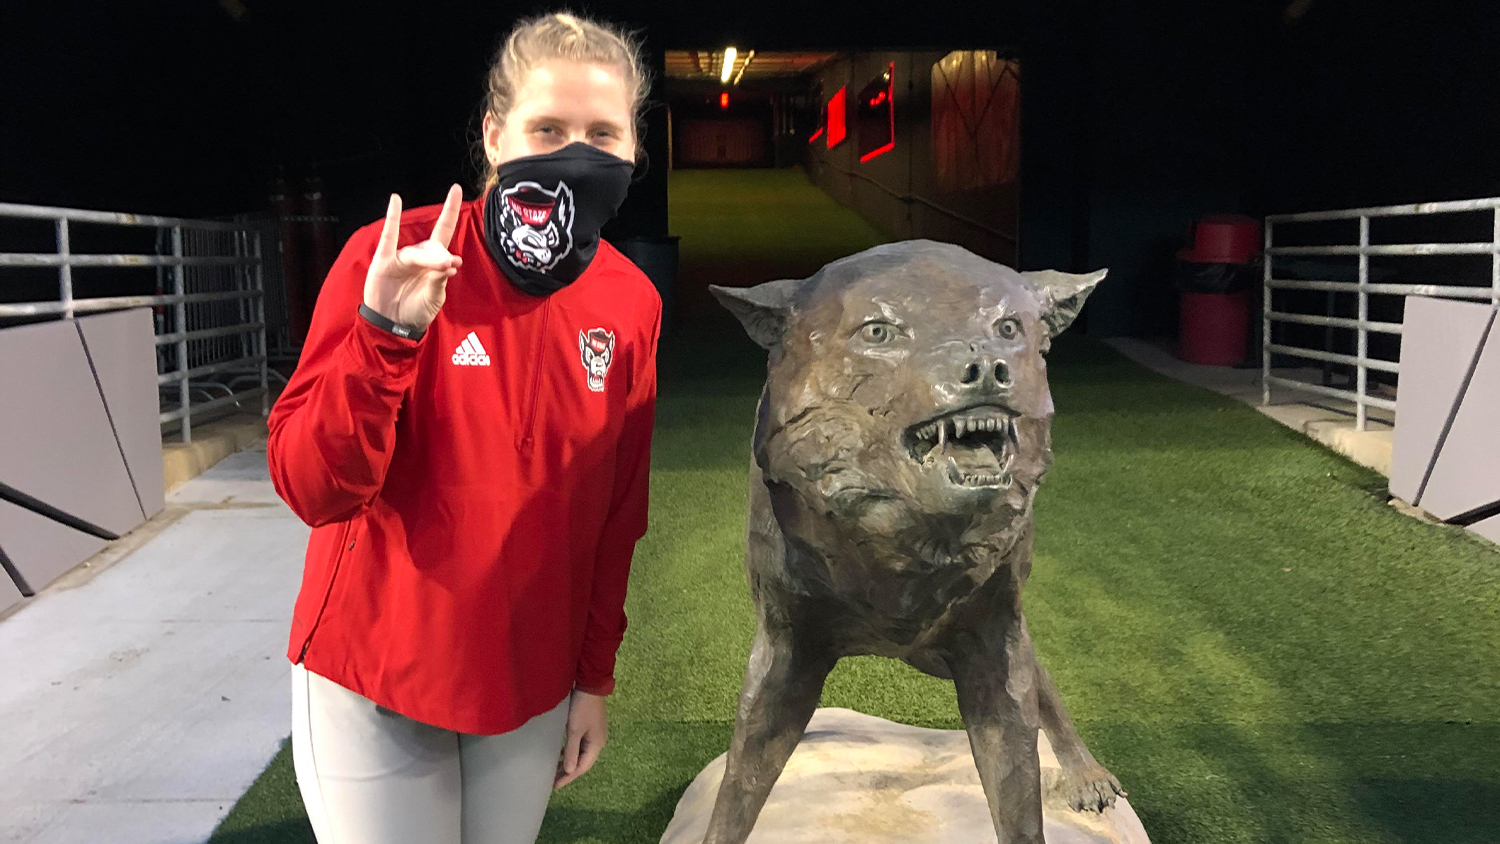 Crista Bain wearing a red jacket and a black NC State face mask makes a wolfie sign next to the wolf statue in Carter Finley Stadium